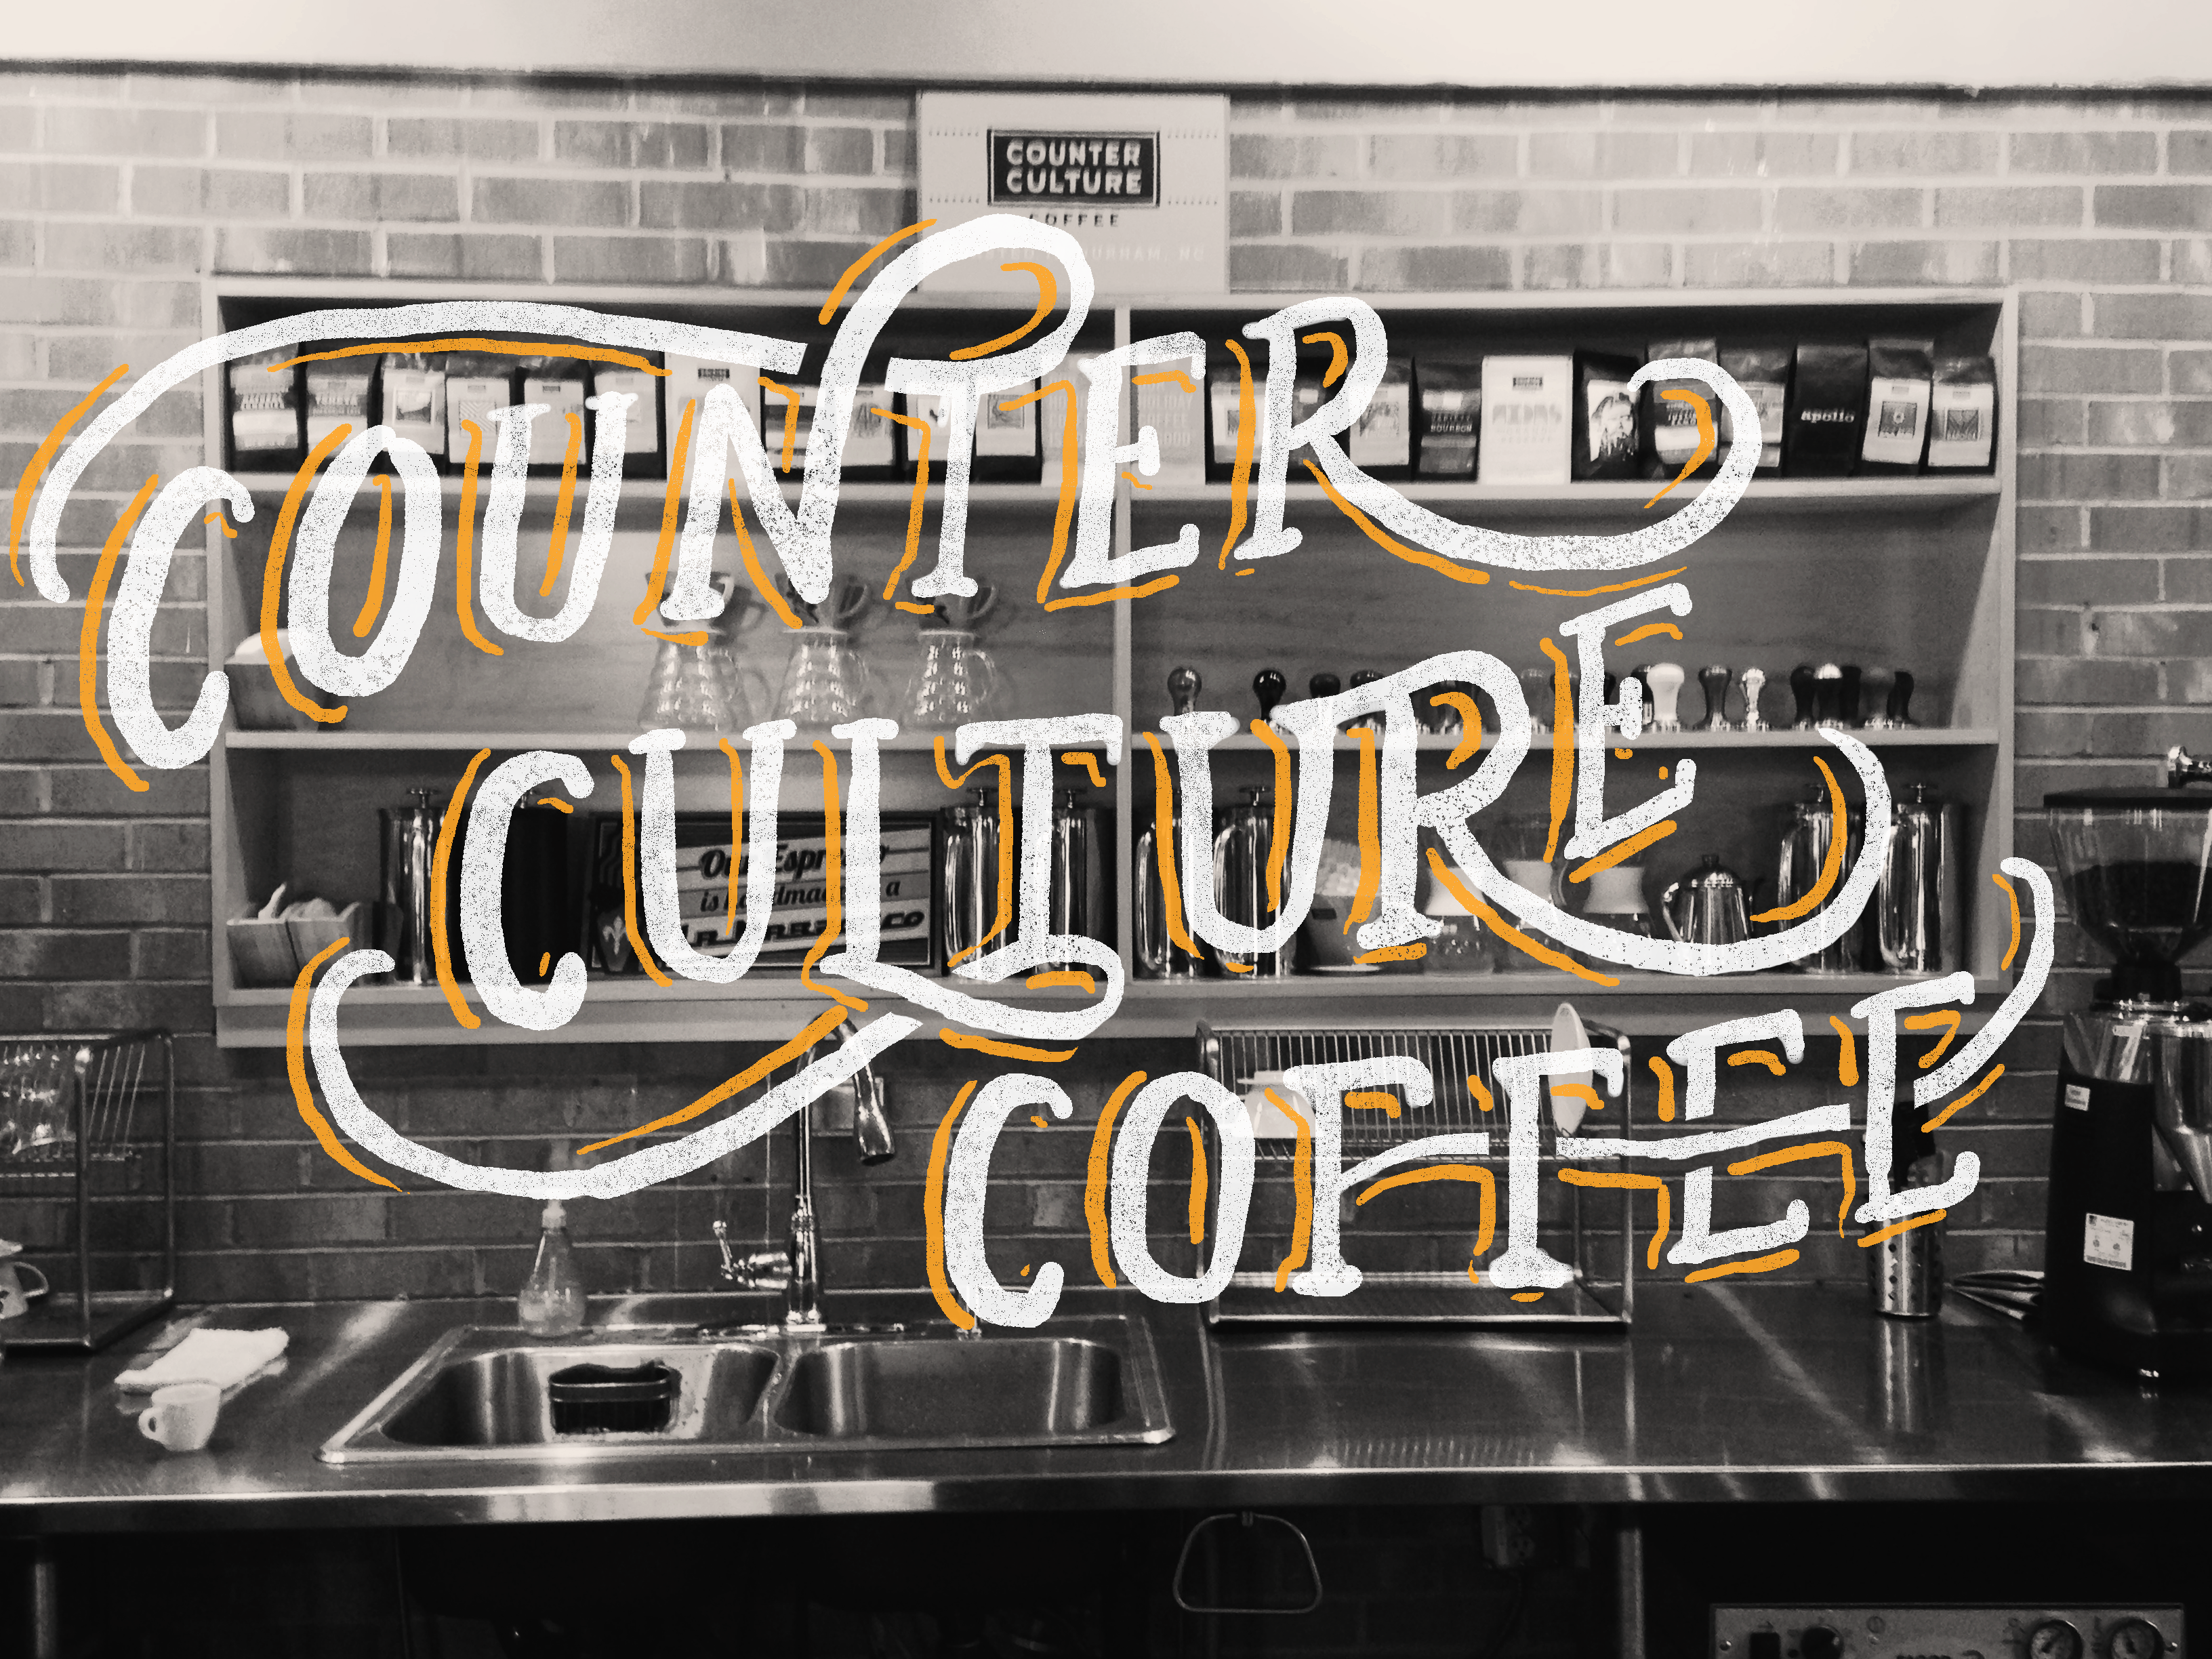 Download this Counter Culture Draw Coffee picture